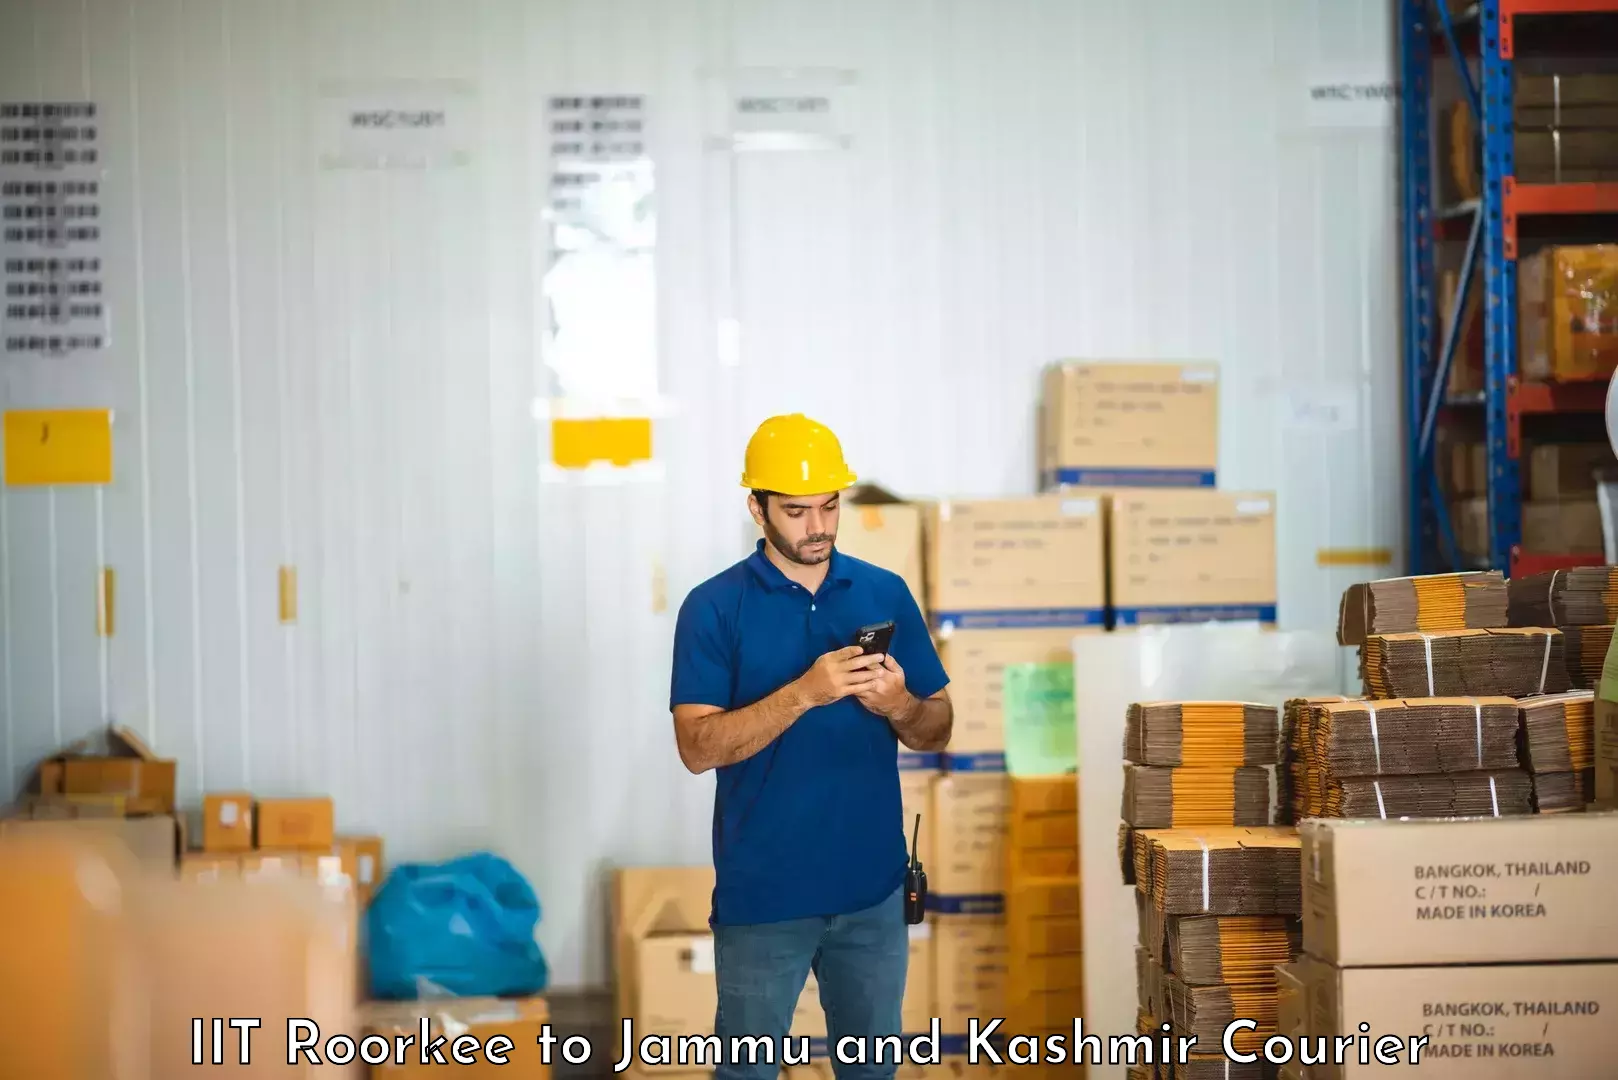 Professional packing services IIT Roorkee to Baramulla